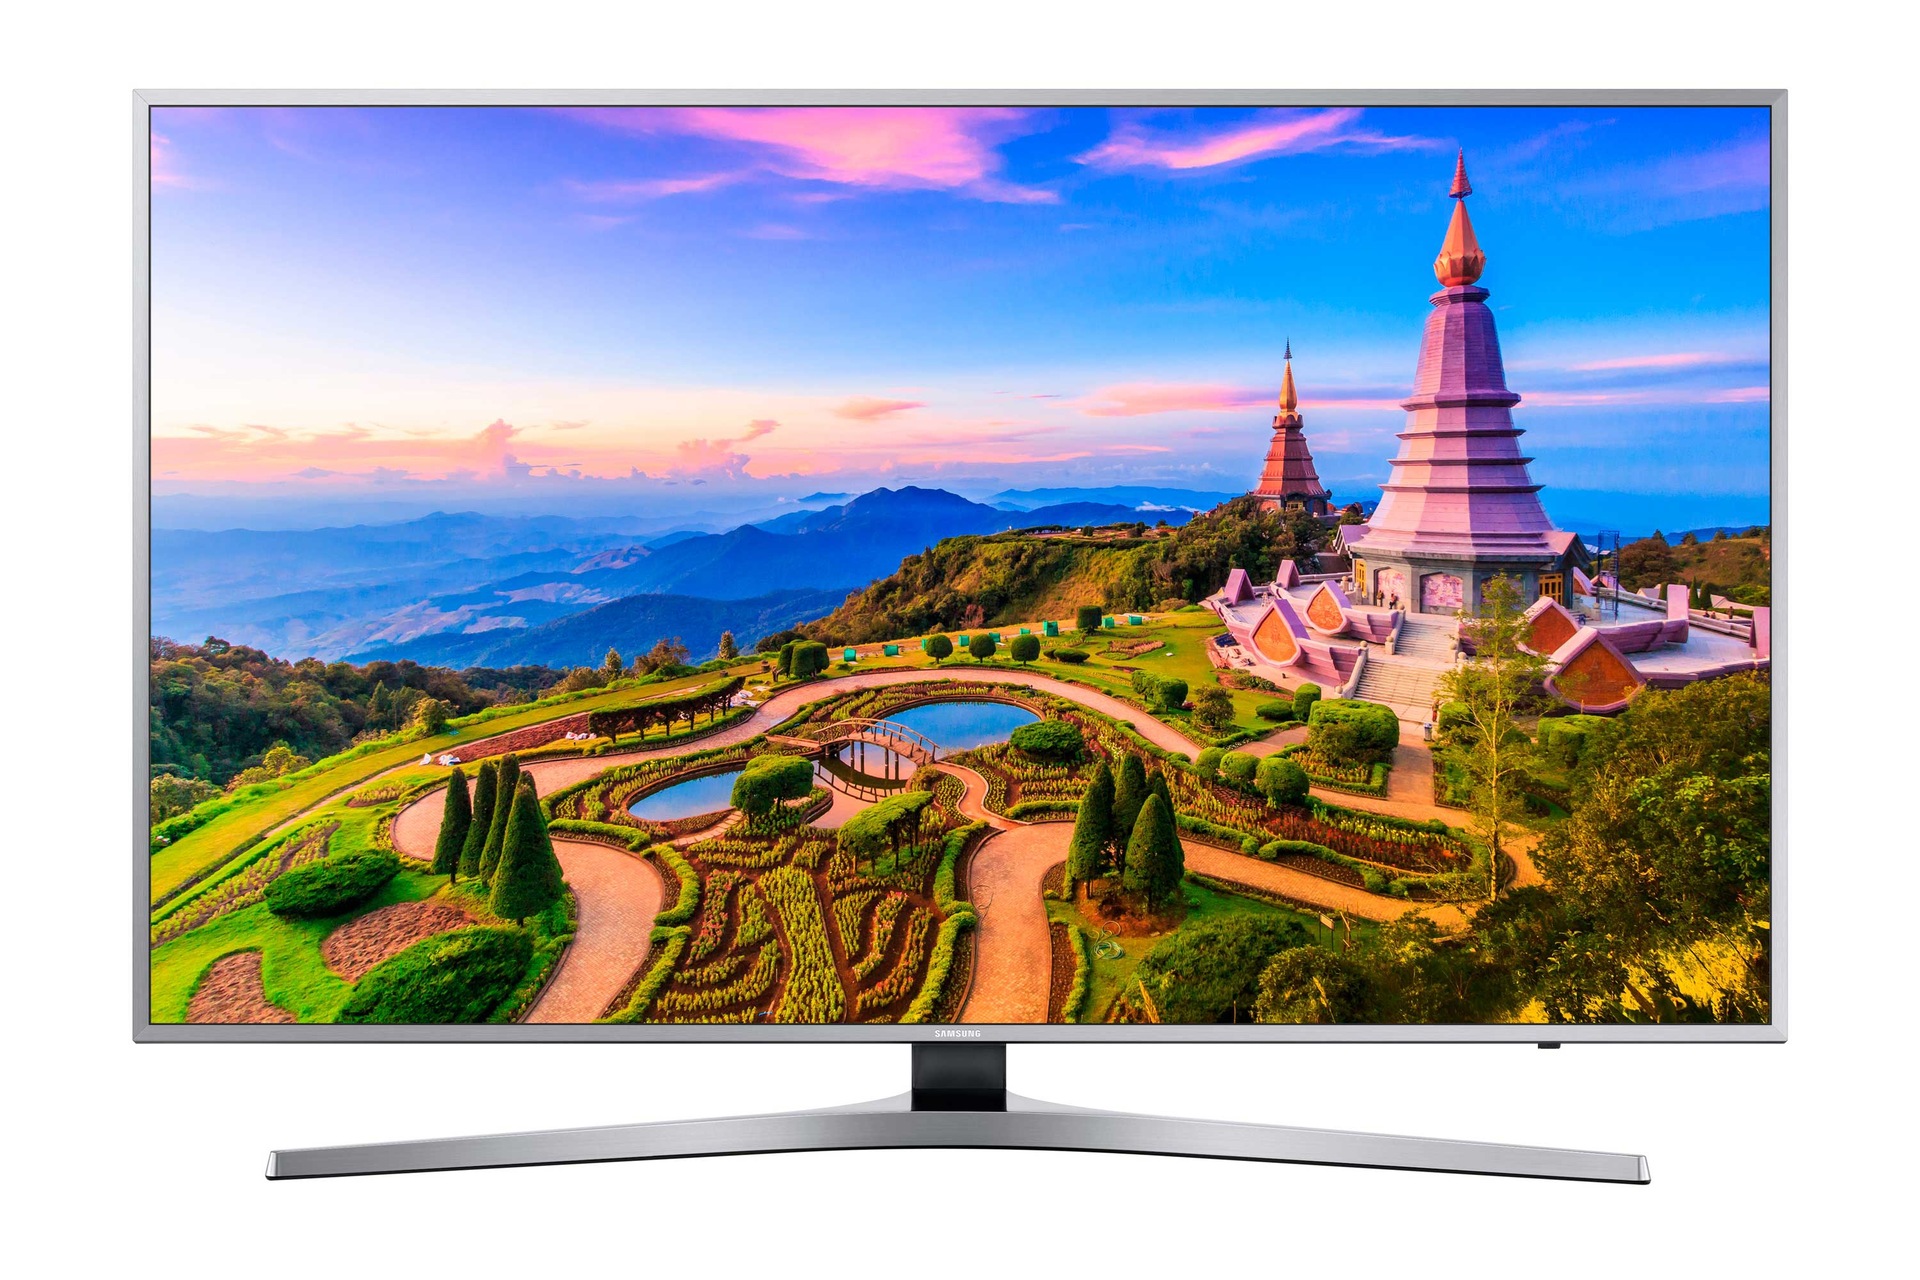 https://images.samsung.com/is/image/samsung/es-uhdtv-mu6400-ue55mu6405uxxc-silver-Silver-61704736?$650_519_PNG$